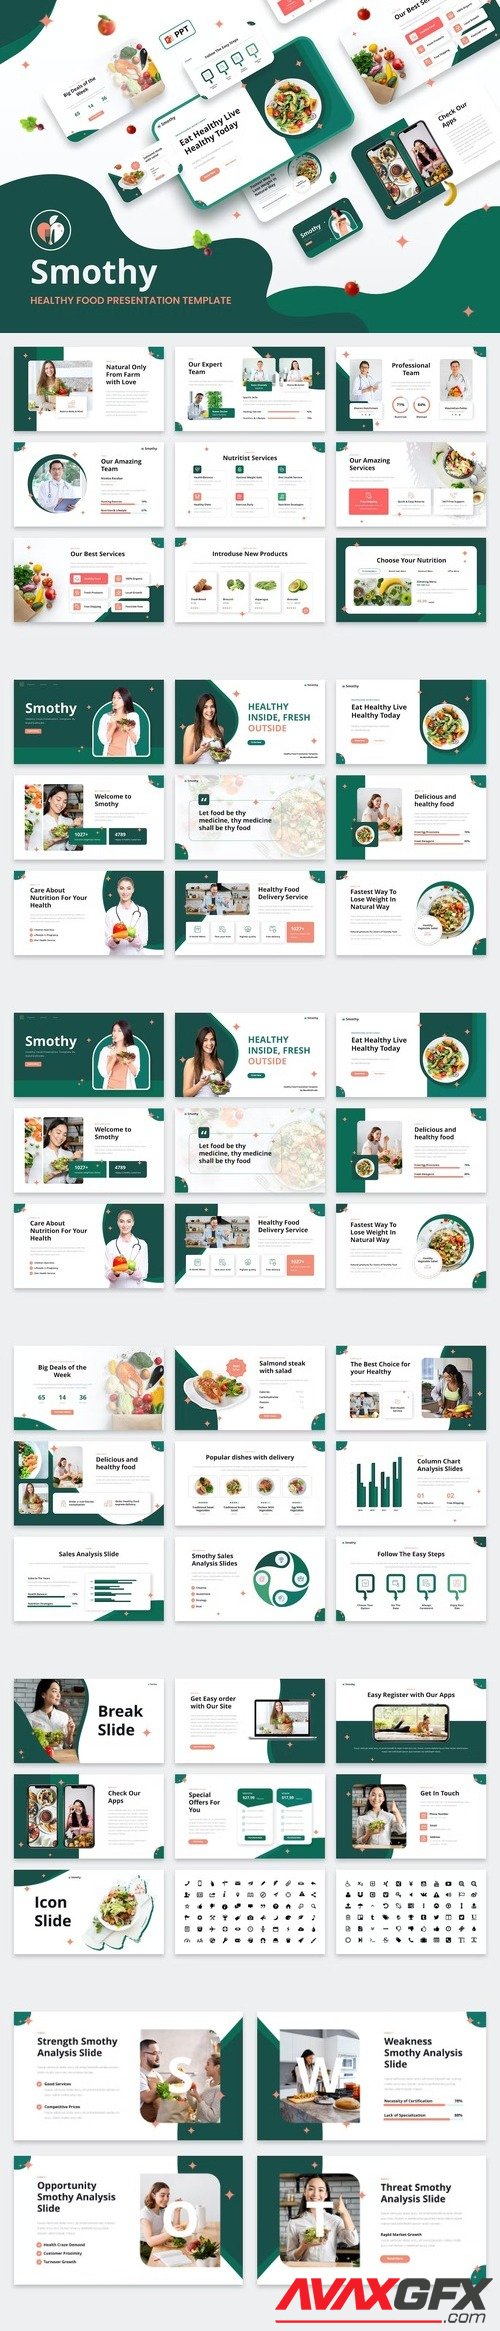 SMOTHY - Healthy Food Powerpoint Template [PPTX]